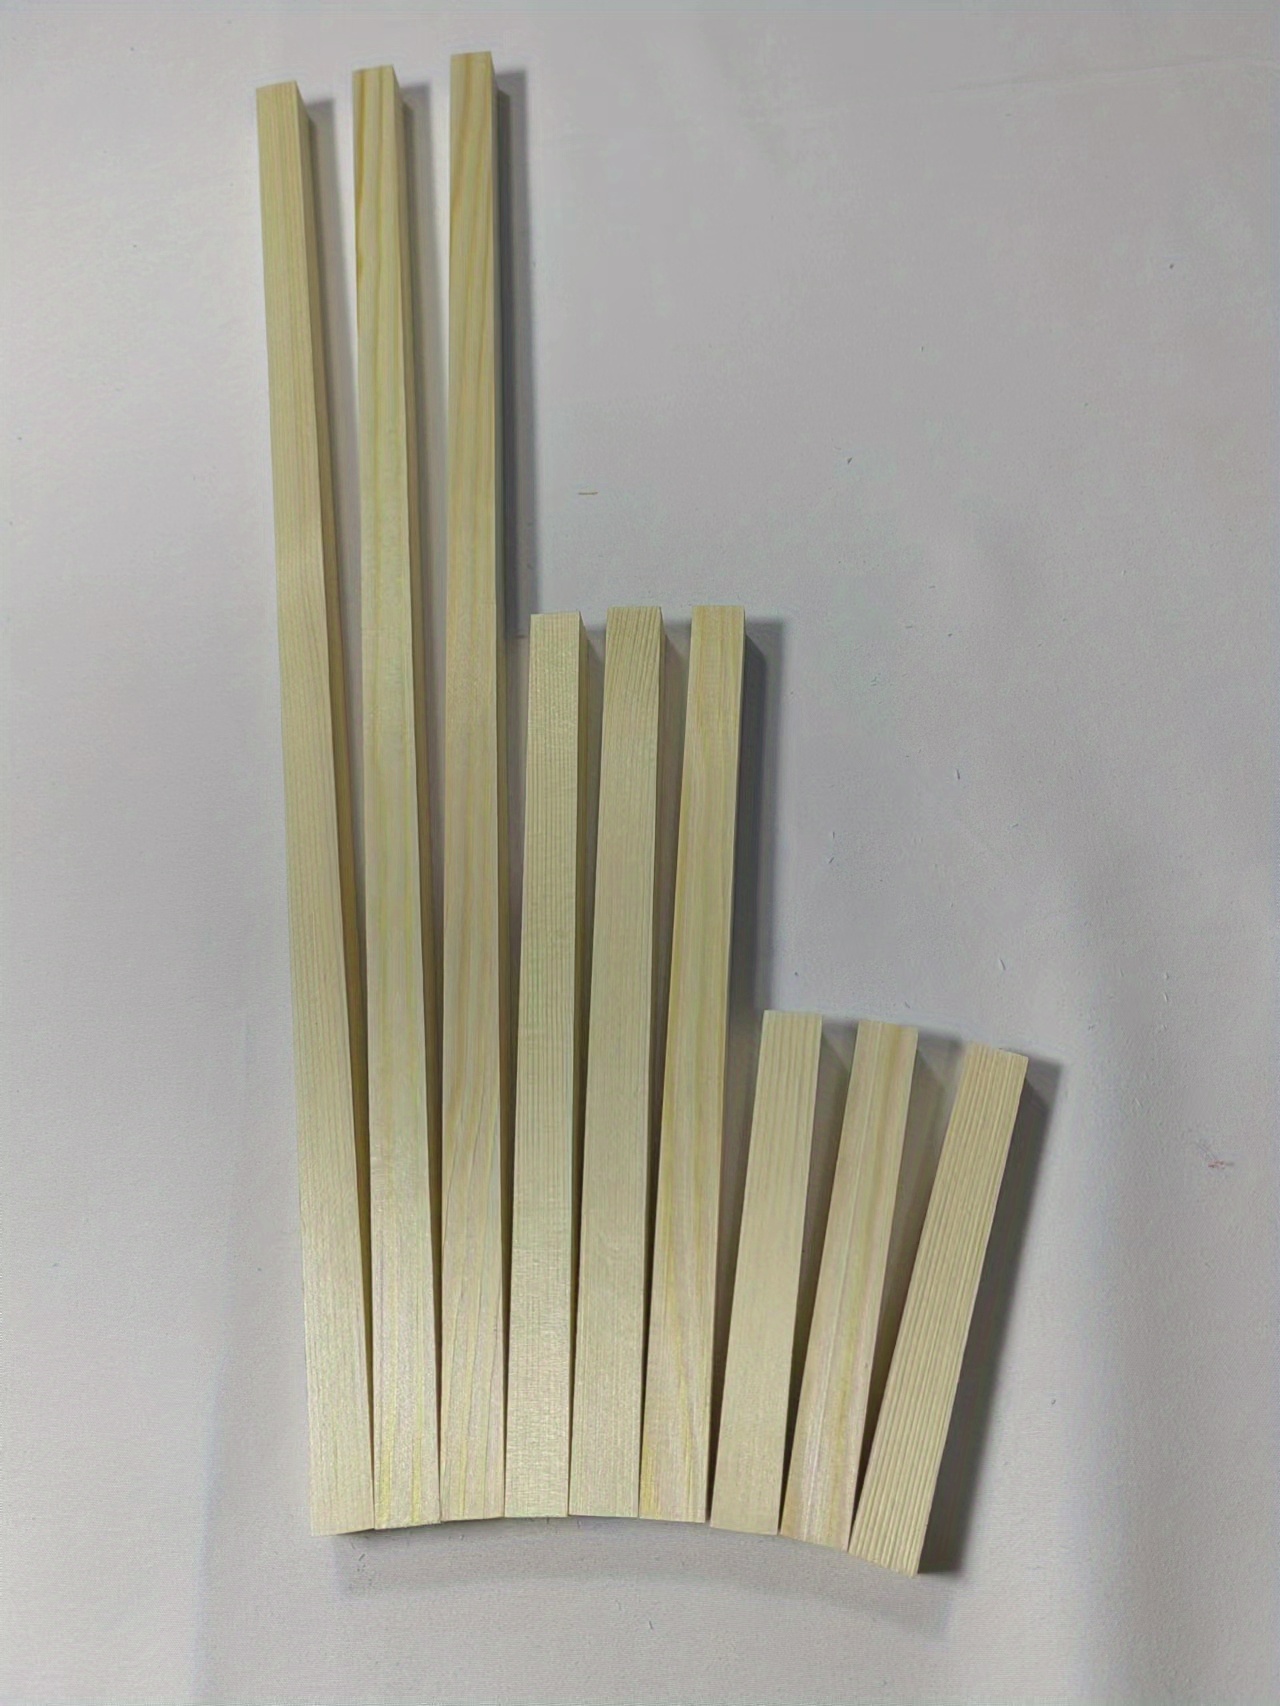 HJZALMI Square Wood Dowel Rod, Natural Long Dowel Strips, Unfinished Wood  Strips for Crafts DIY Projects Models Making Supplies, Customization  Support